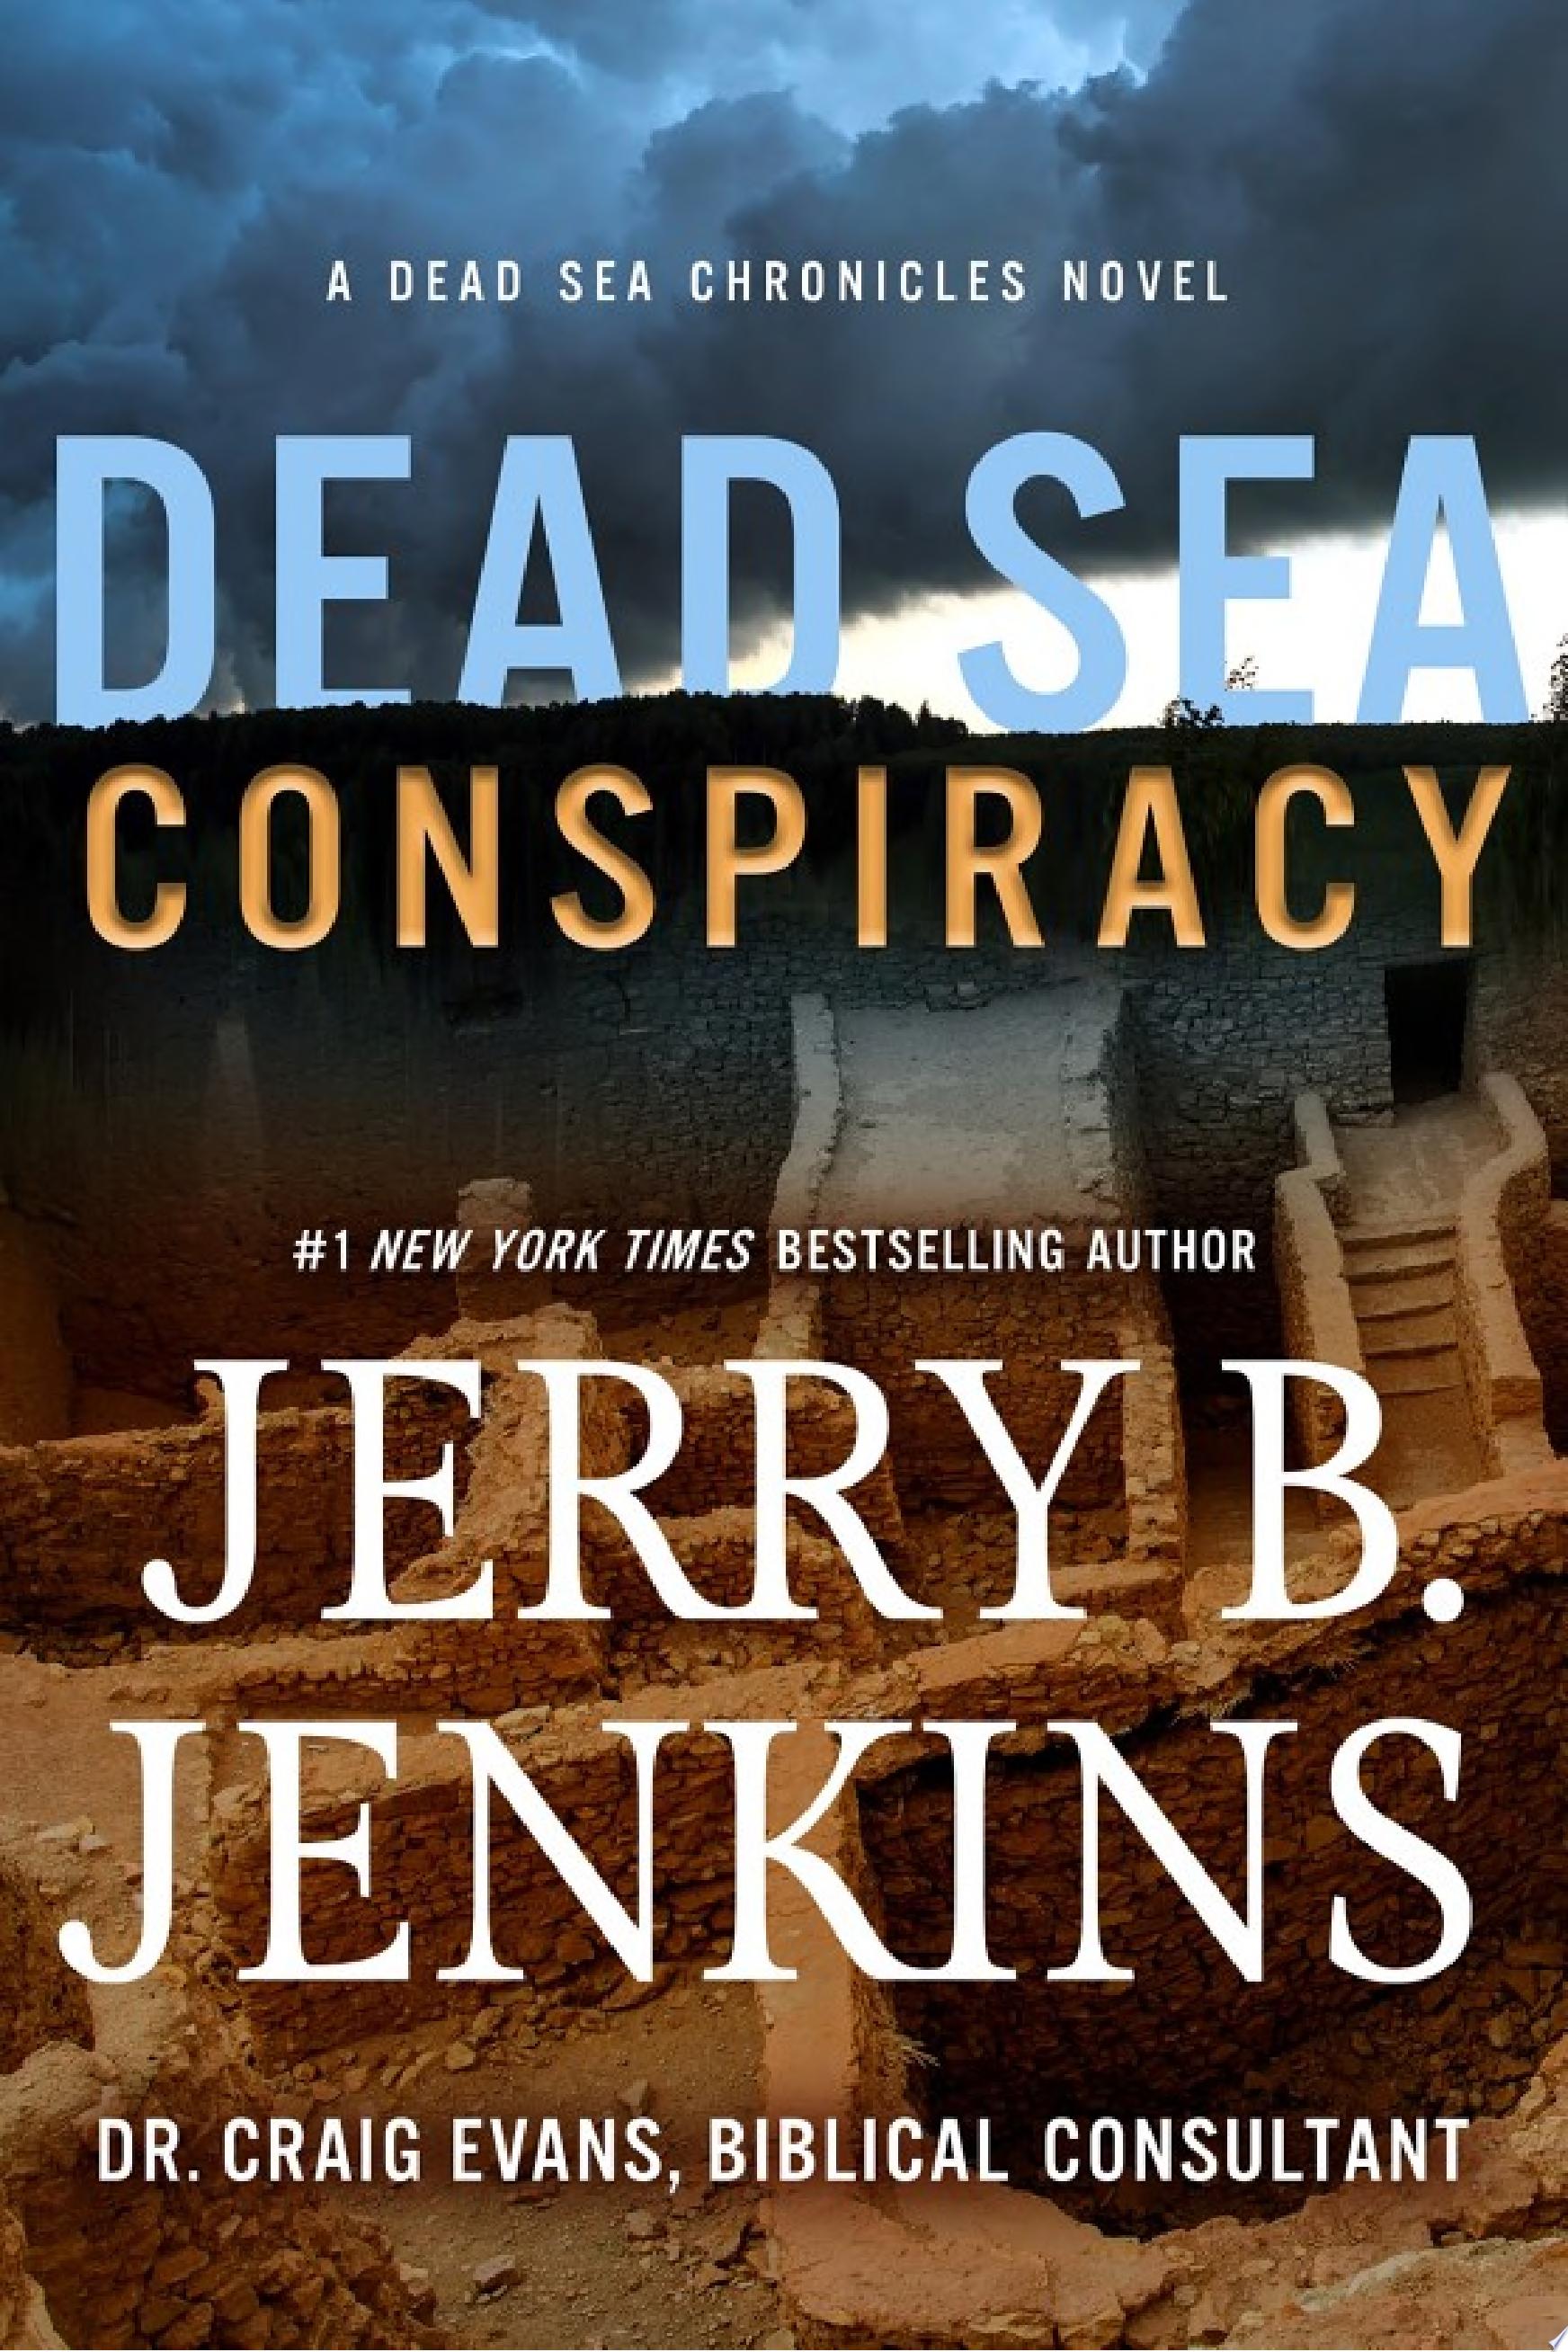 Image for "Dead Sea Conspiracy"